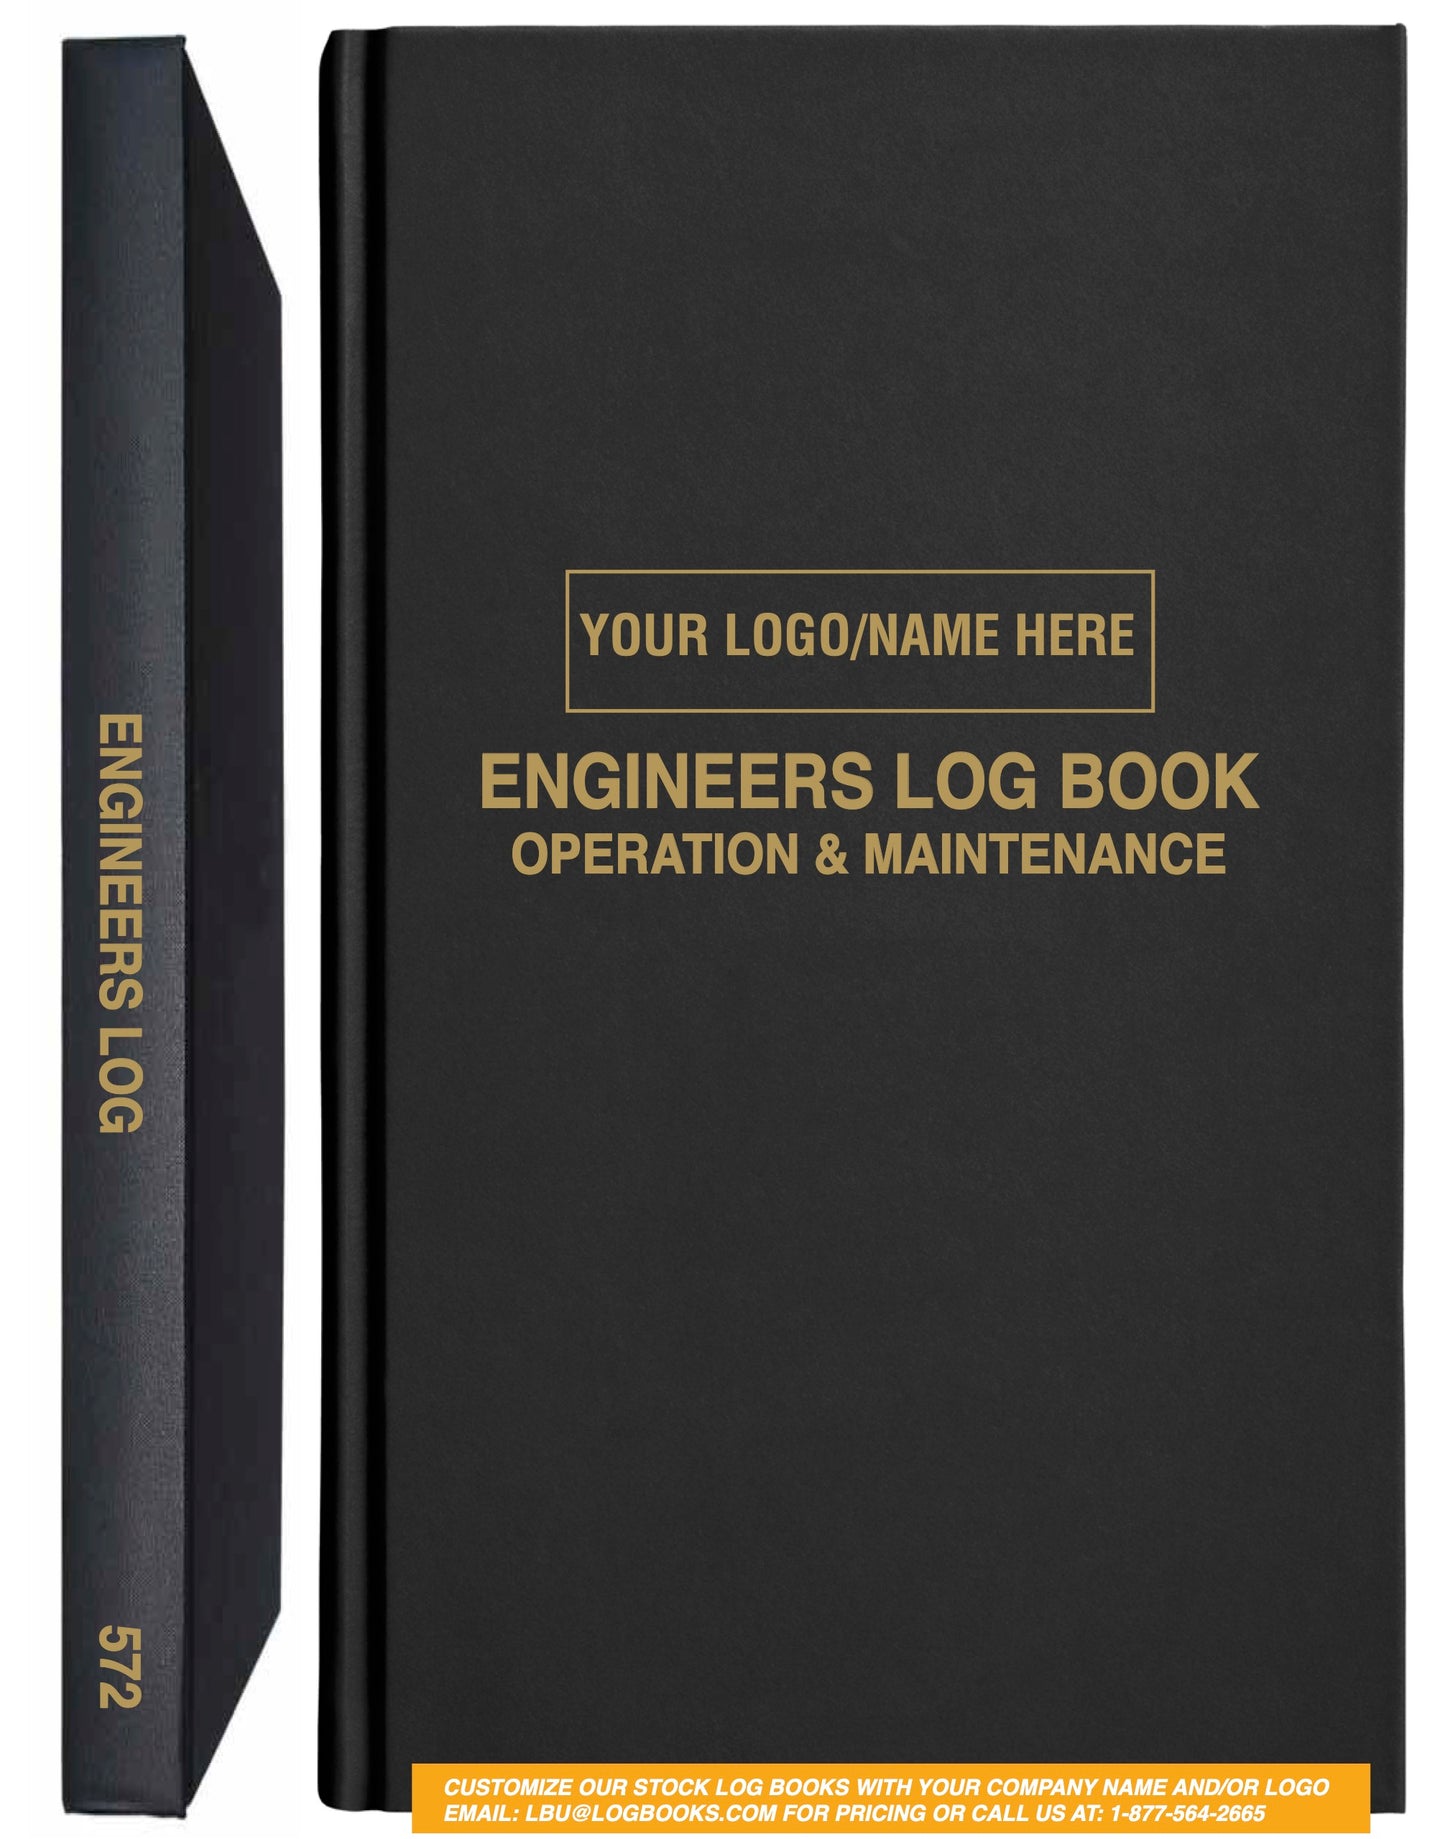 Engineers (2 Shifts per page) Log Book #572